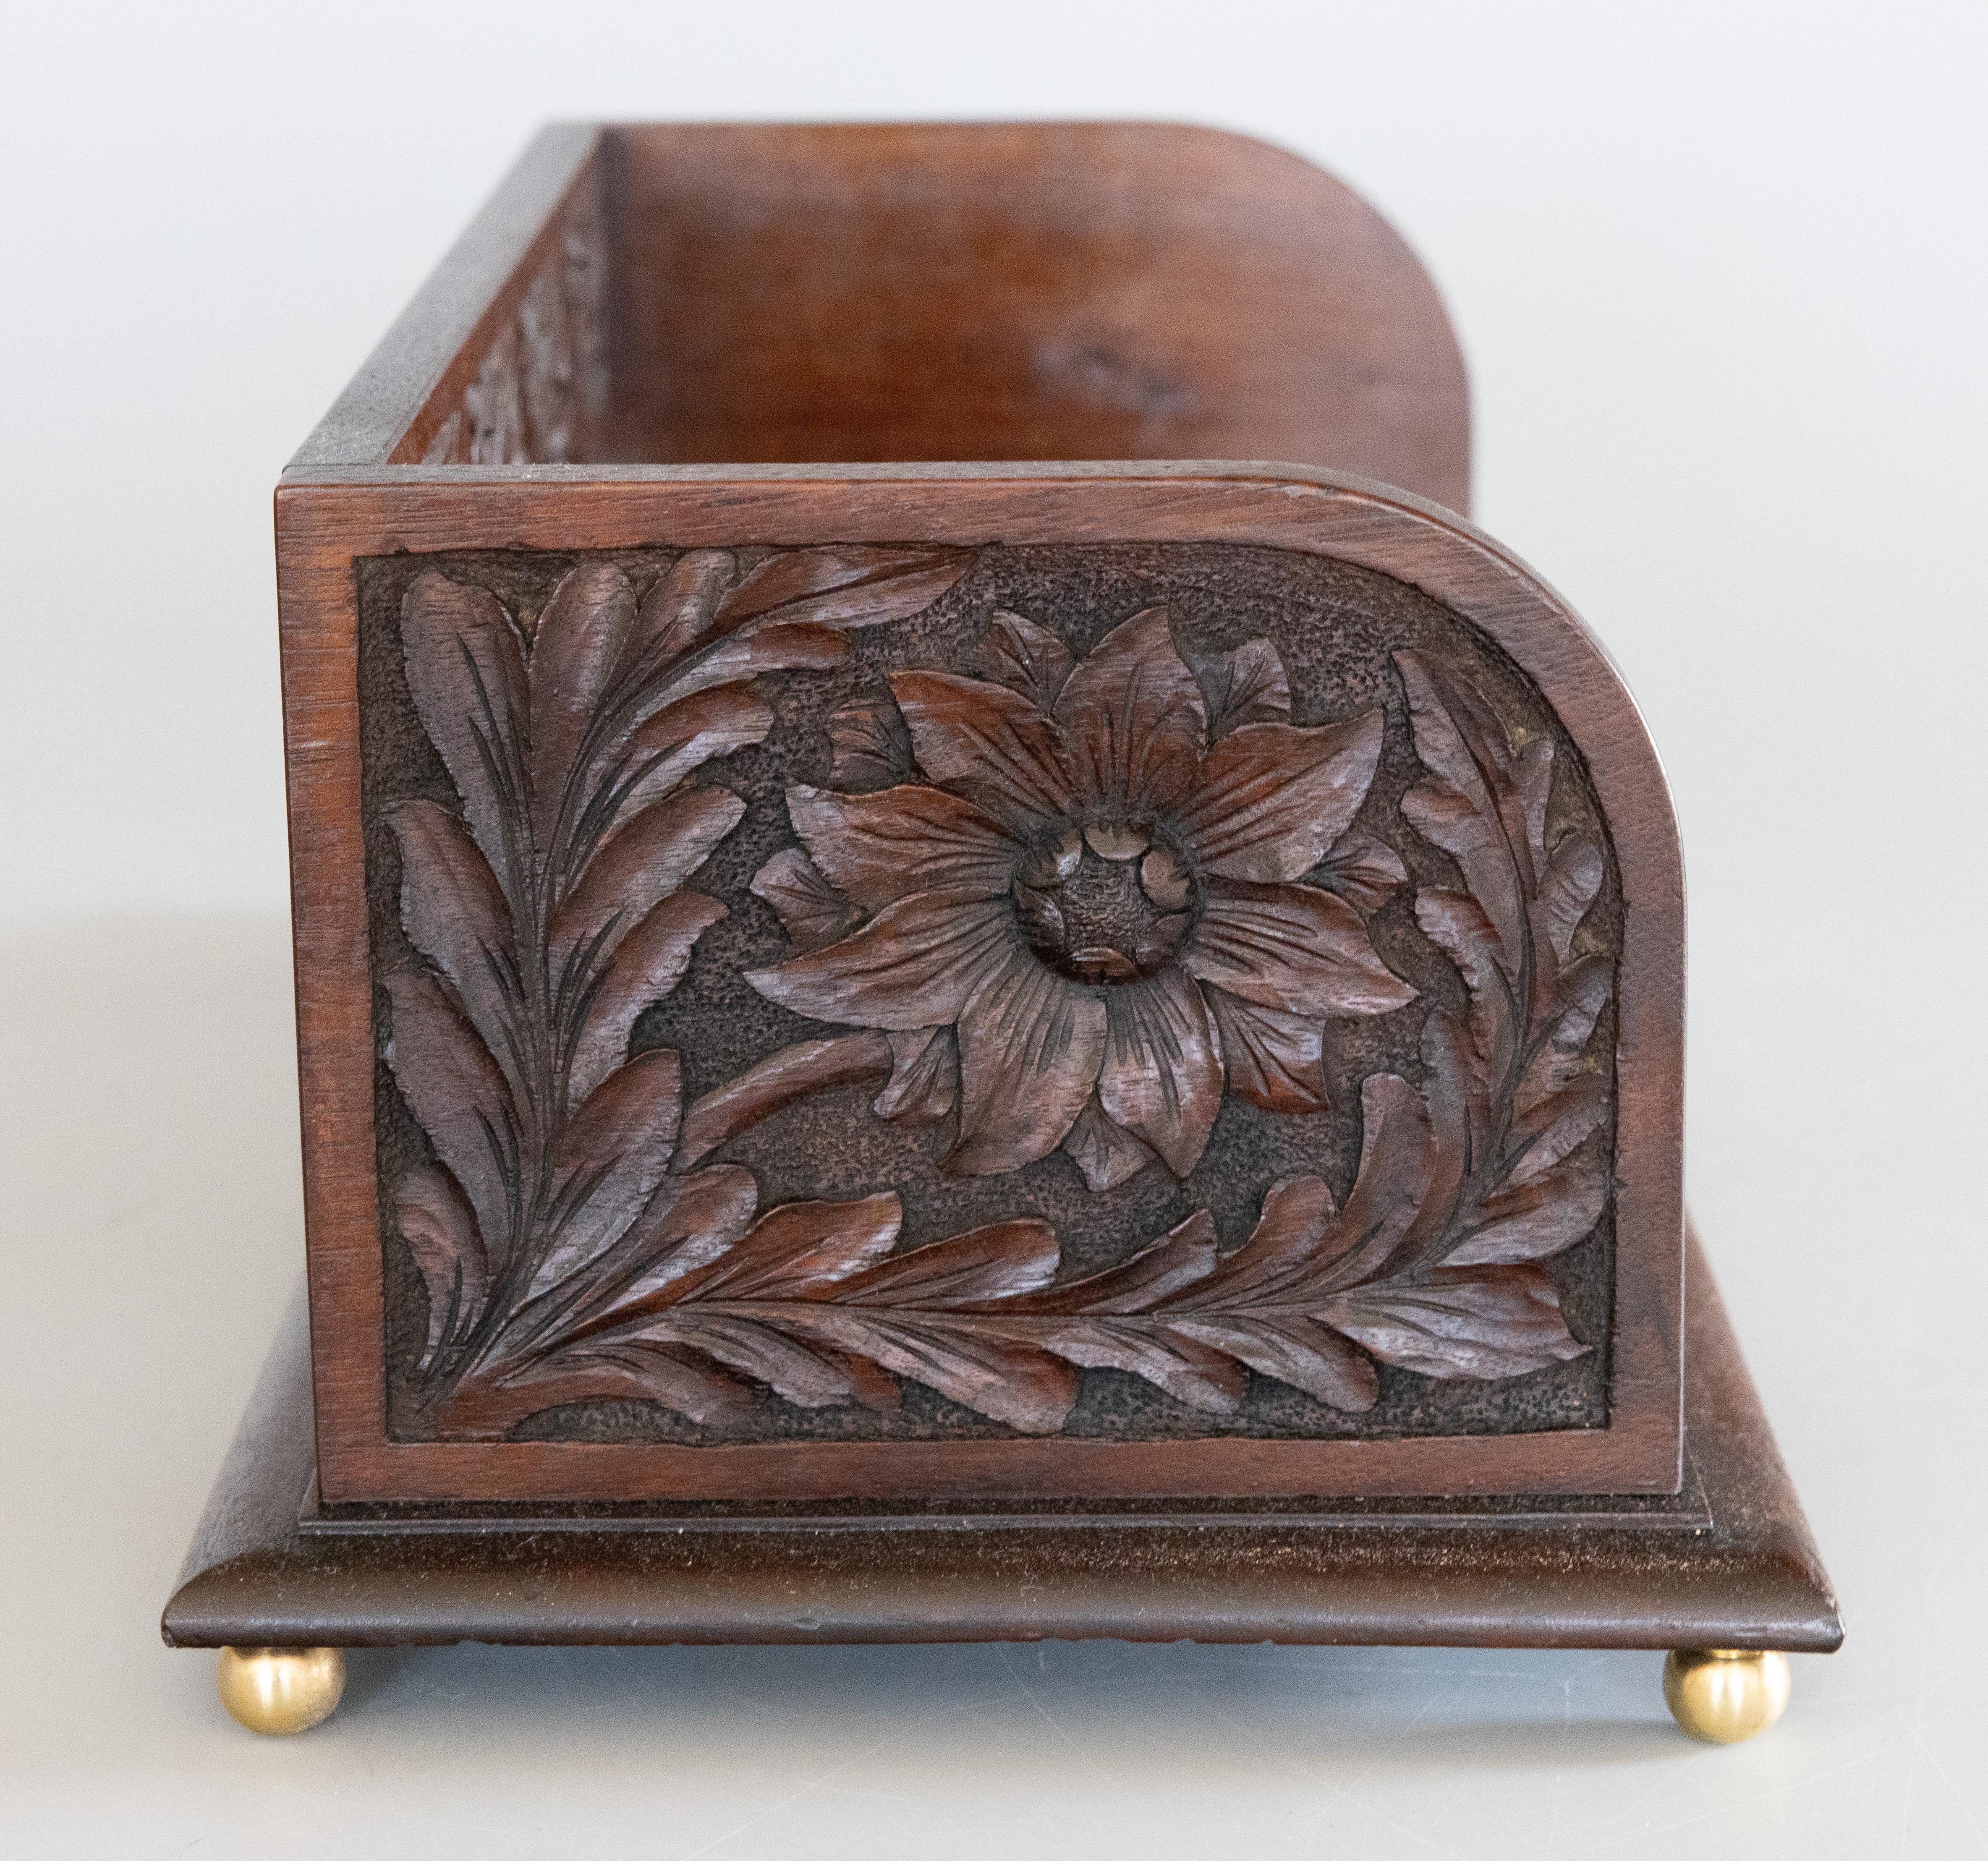 Hand-Carved English Carved Mahogany Table Top Book Trough Rack Stand Bookends, C. 1900 For Sale